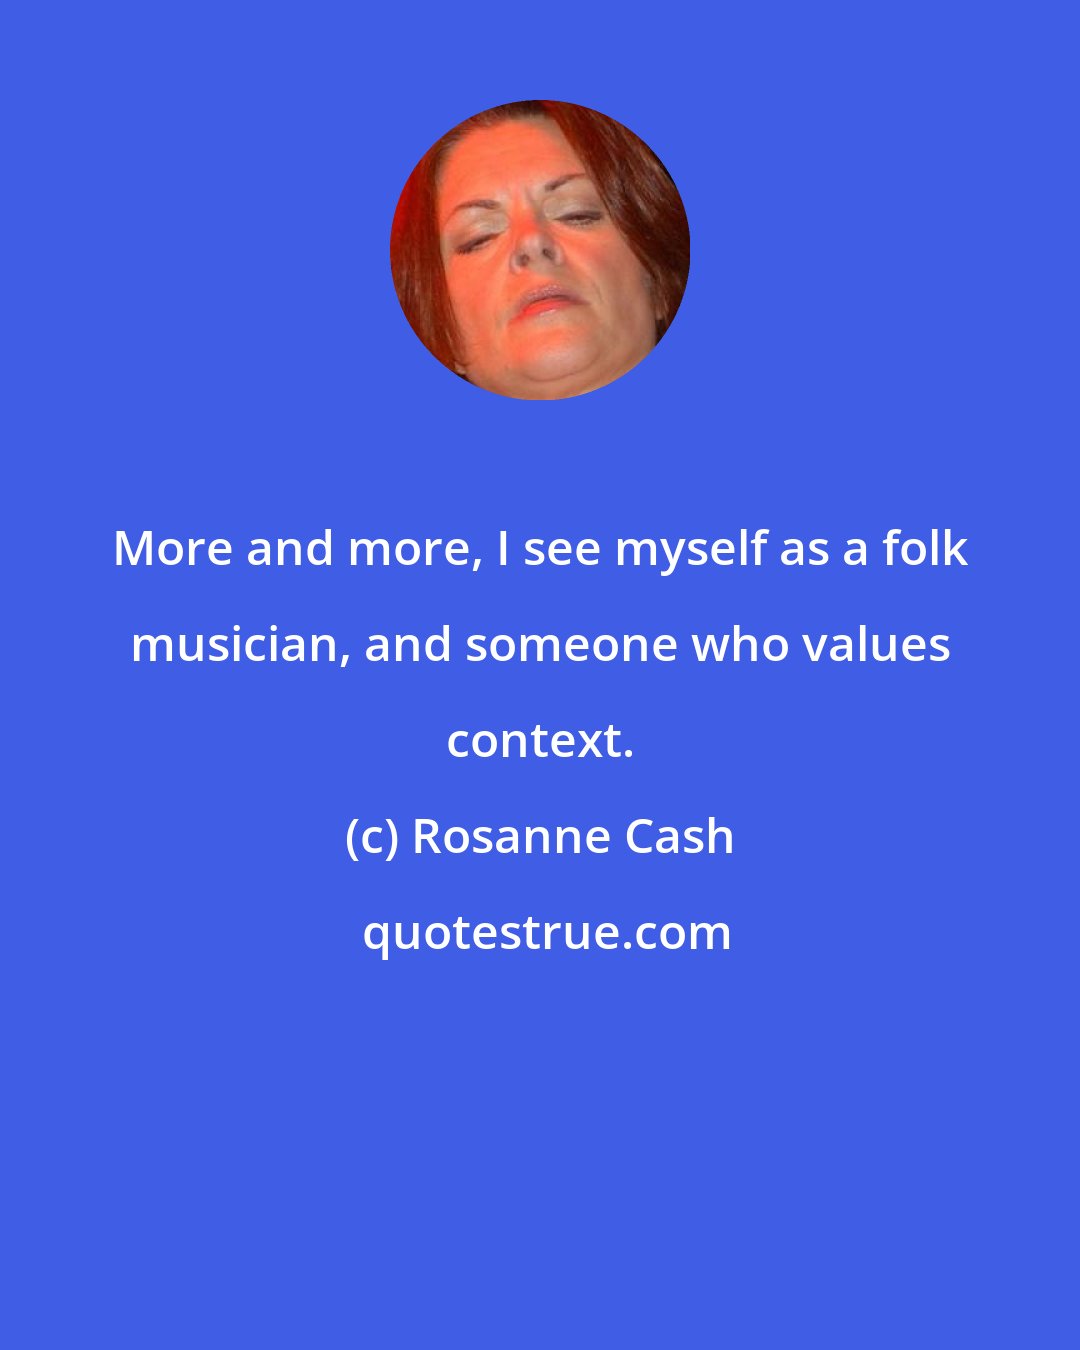 Rosanne Cash: More and more, I see myself as a folk musician, and someone who values context.